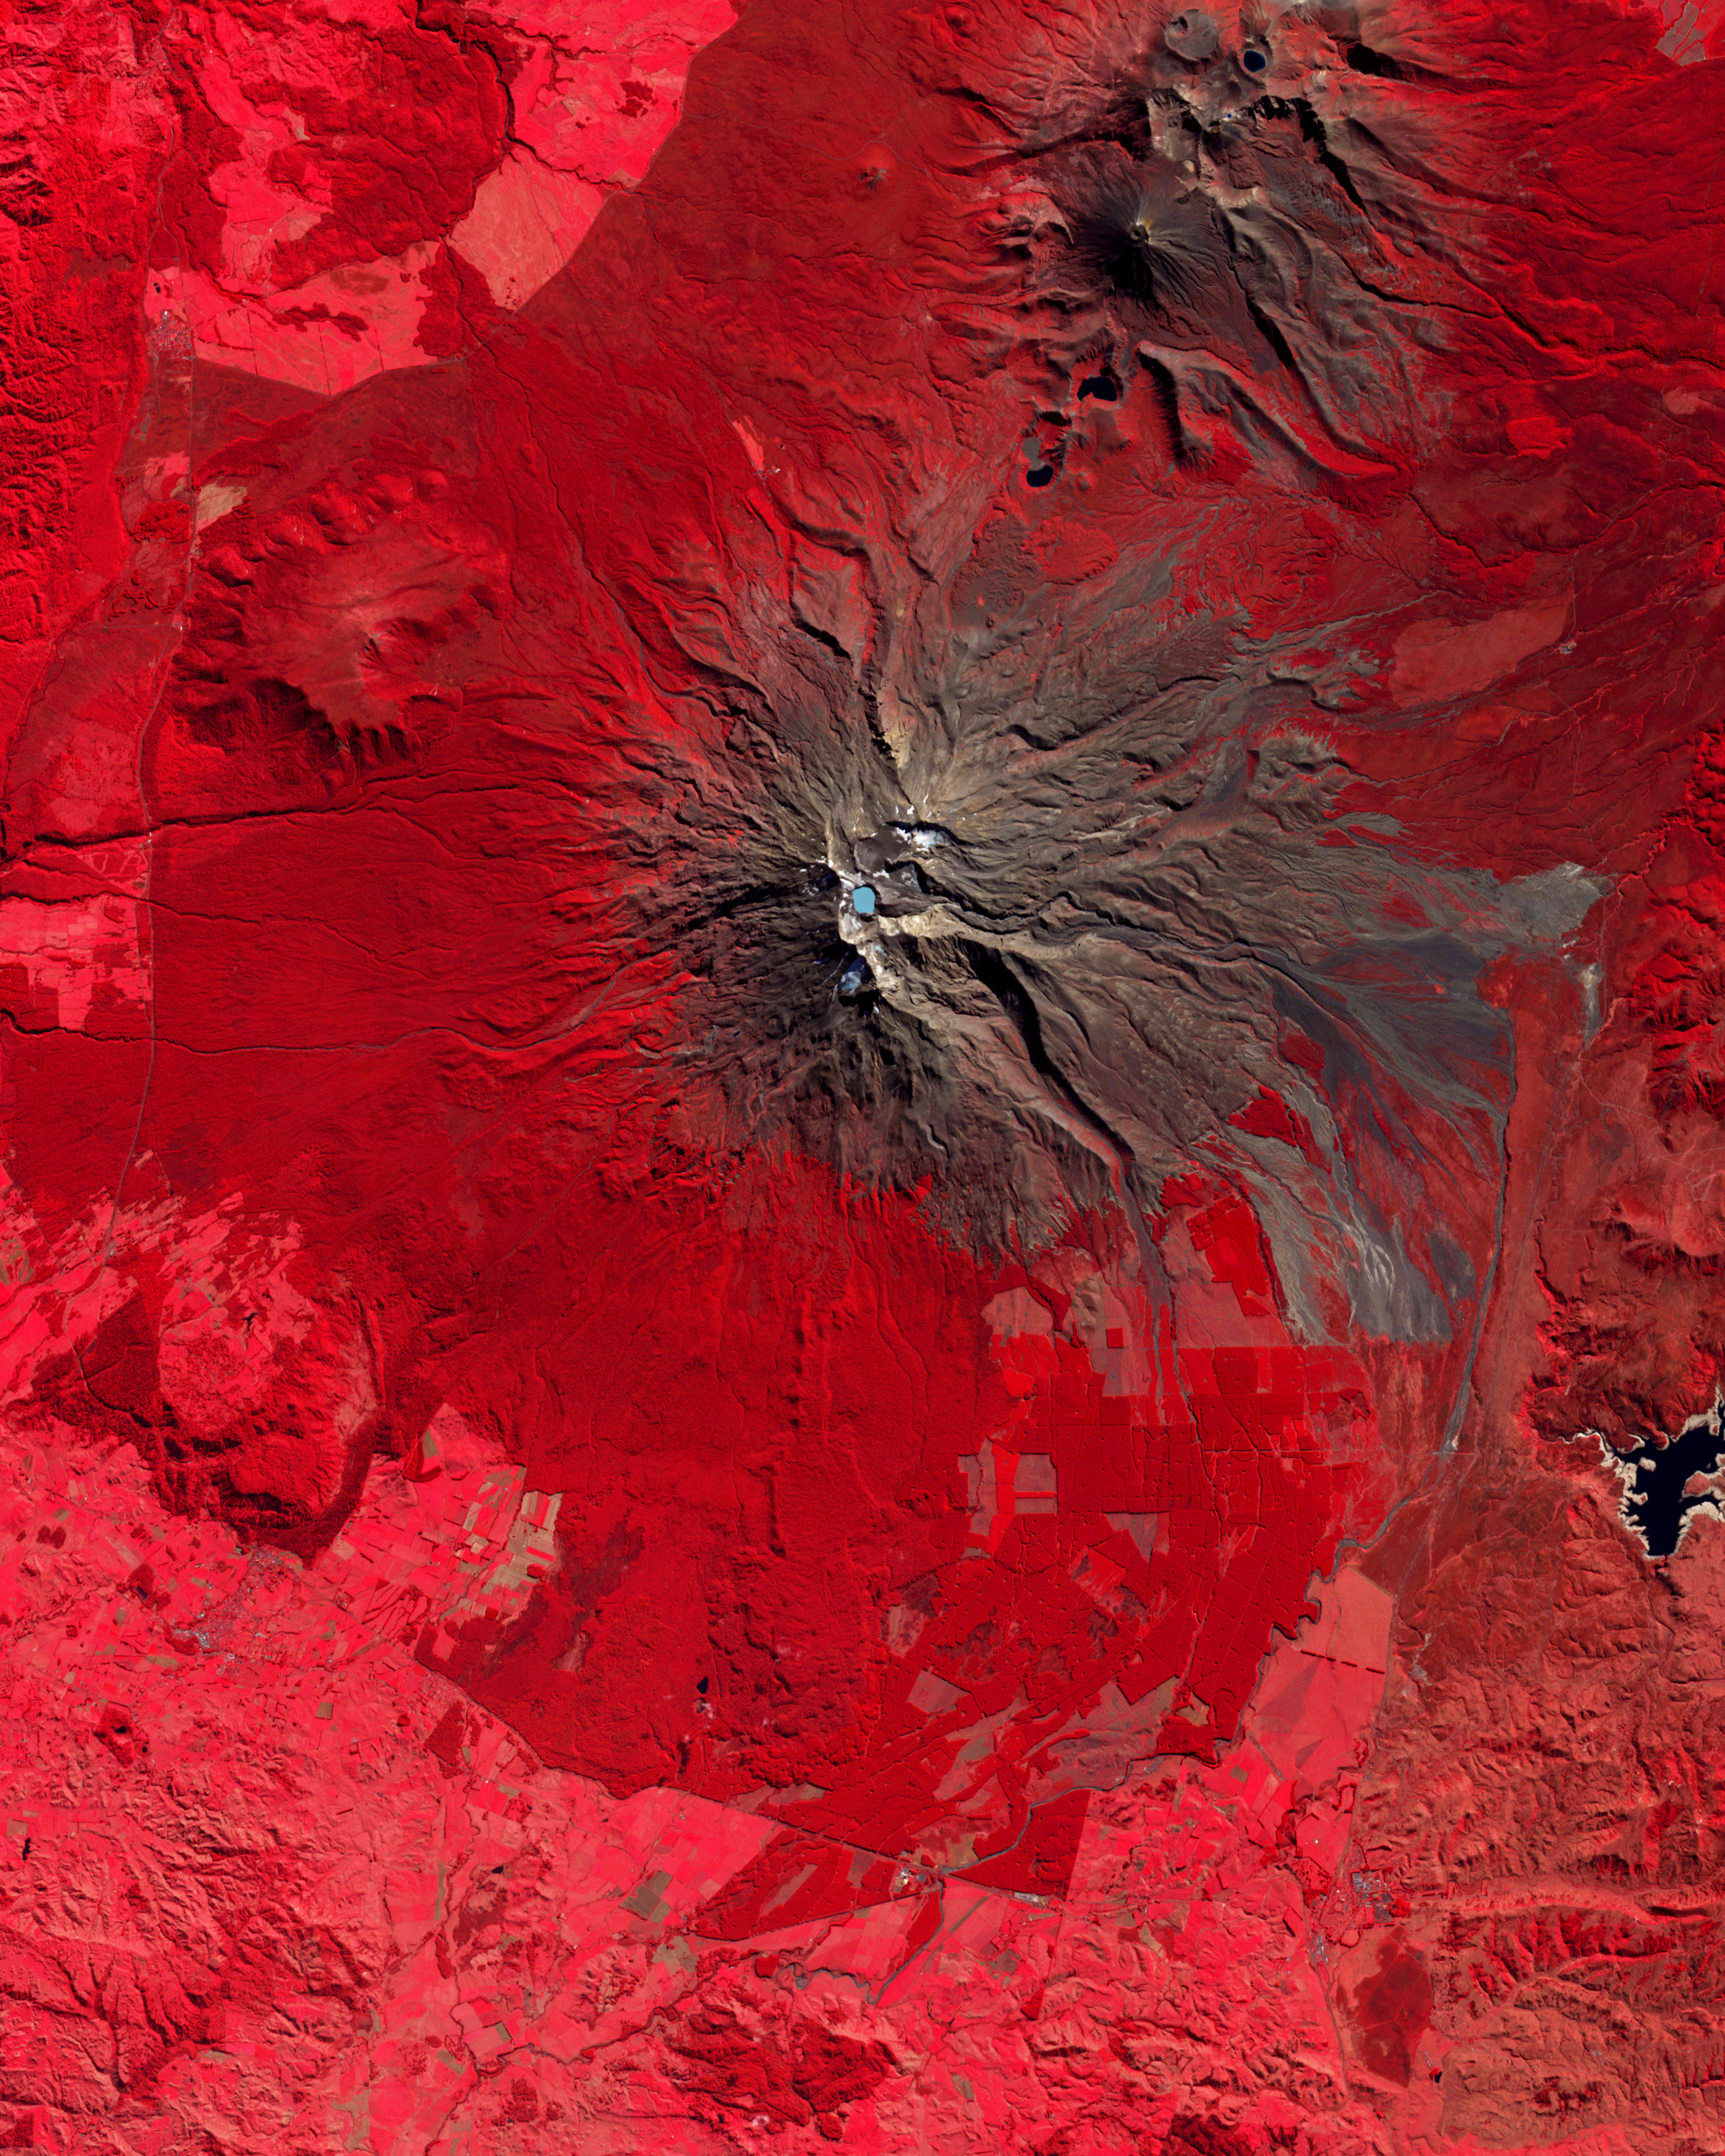 A Satellite Eye on Mount Ruapehu - related image preview